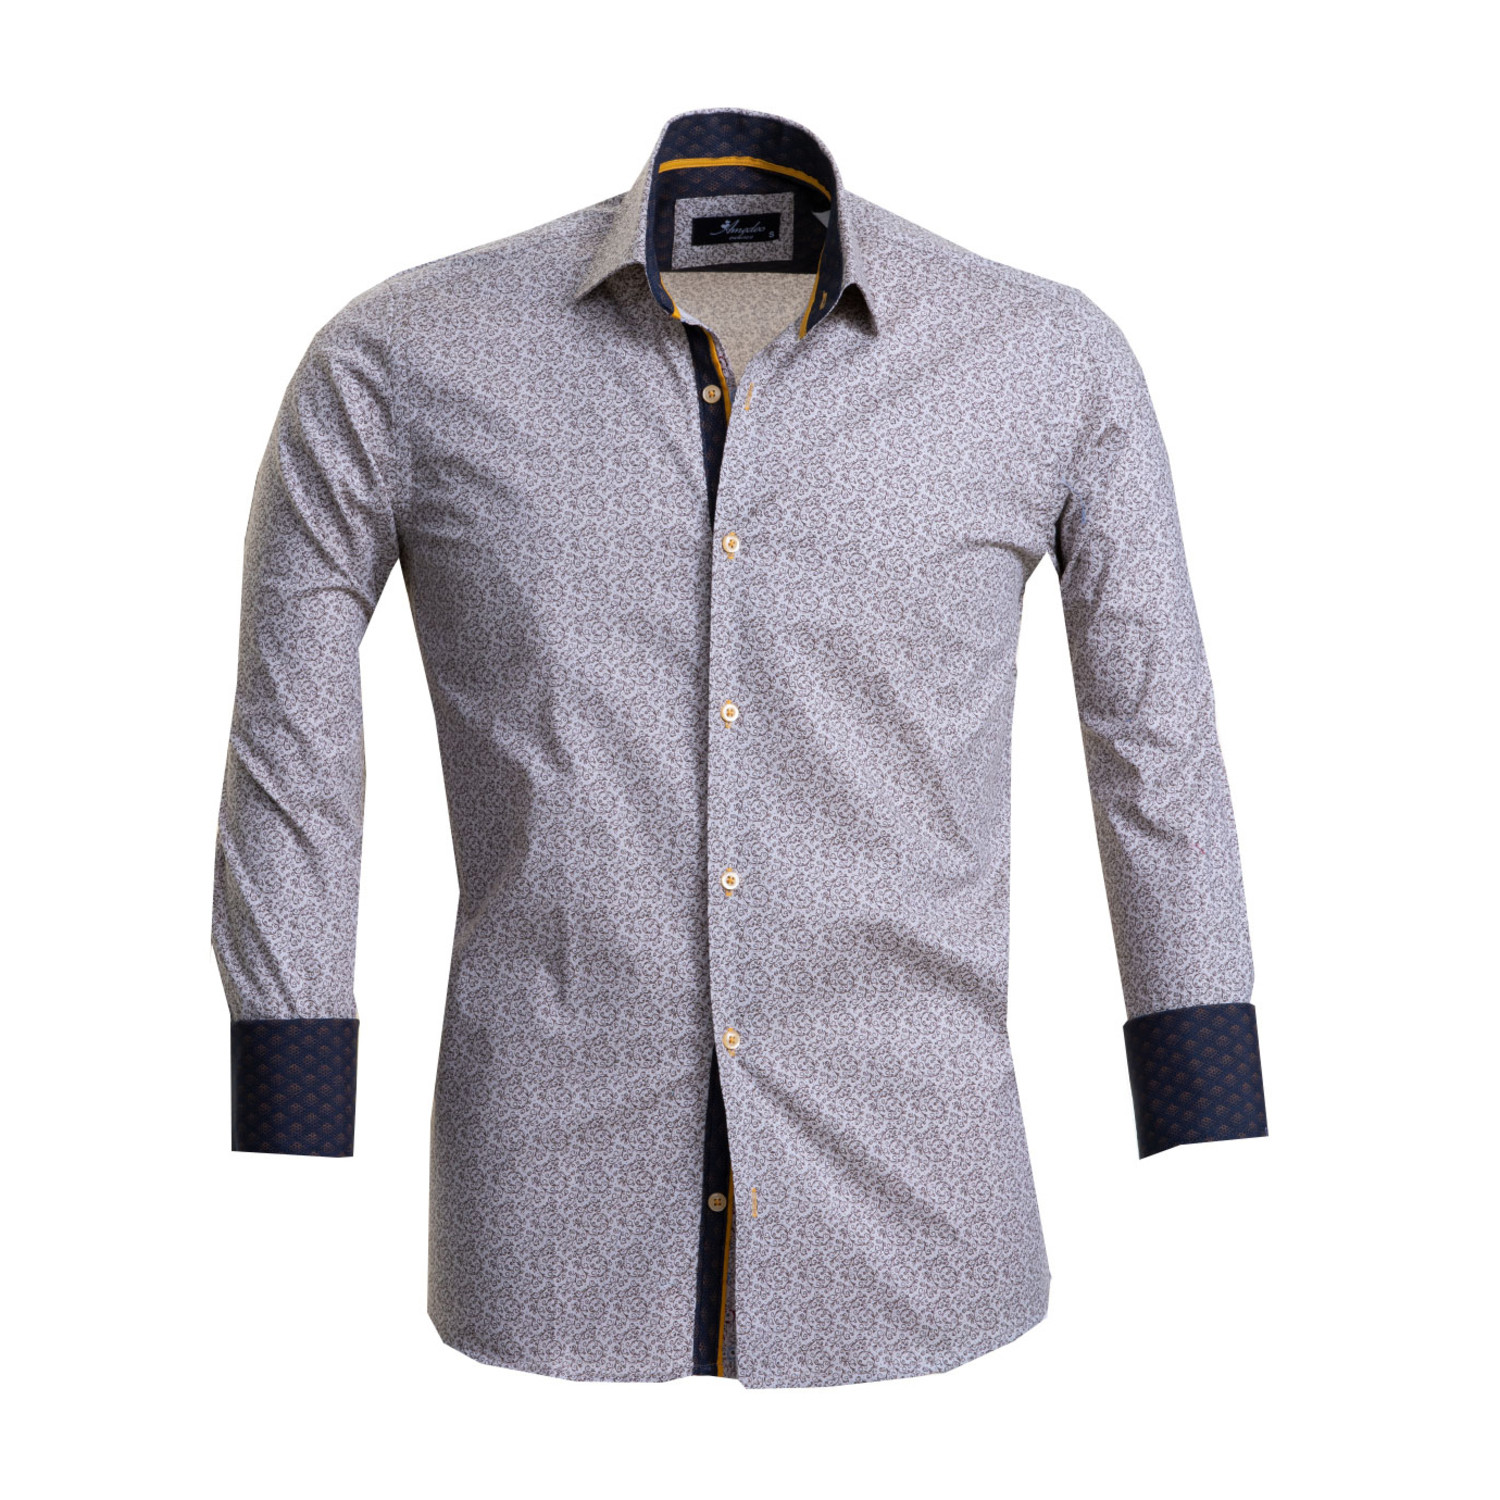 Reversible French Cuff Dress Shirt // Tan (S) - Amedeo Exclusive ...